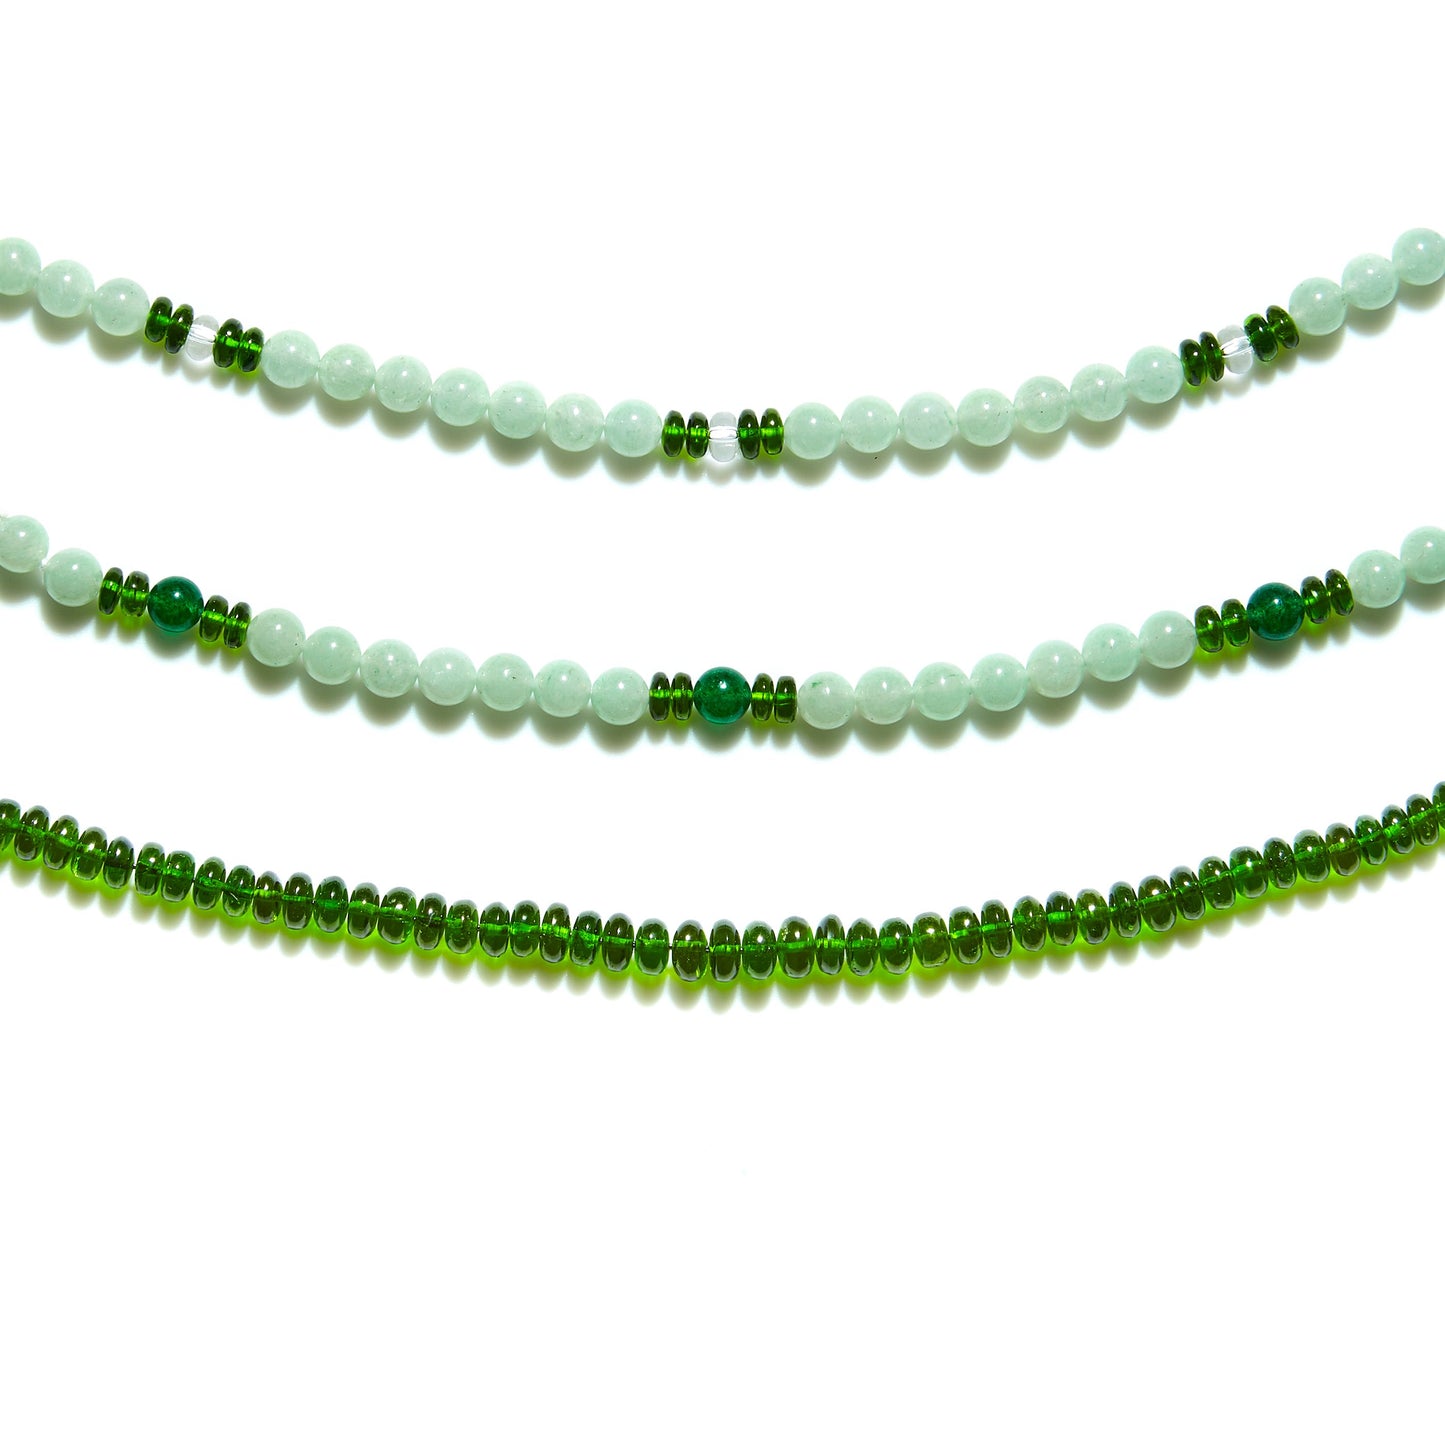 Three separate Chrome Diopside necklaces, known for awakening your healing wisdom and power